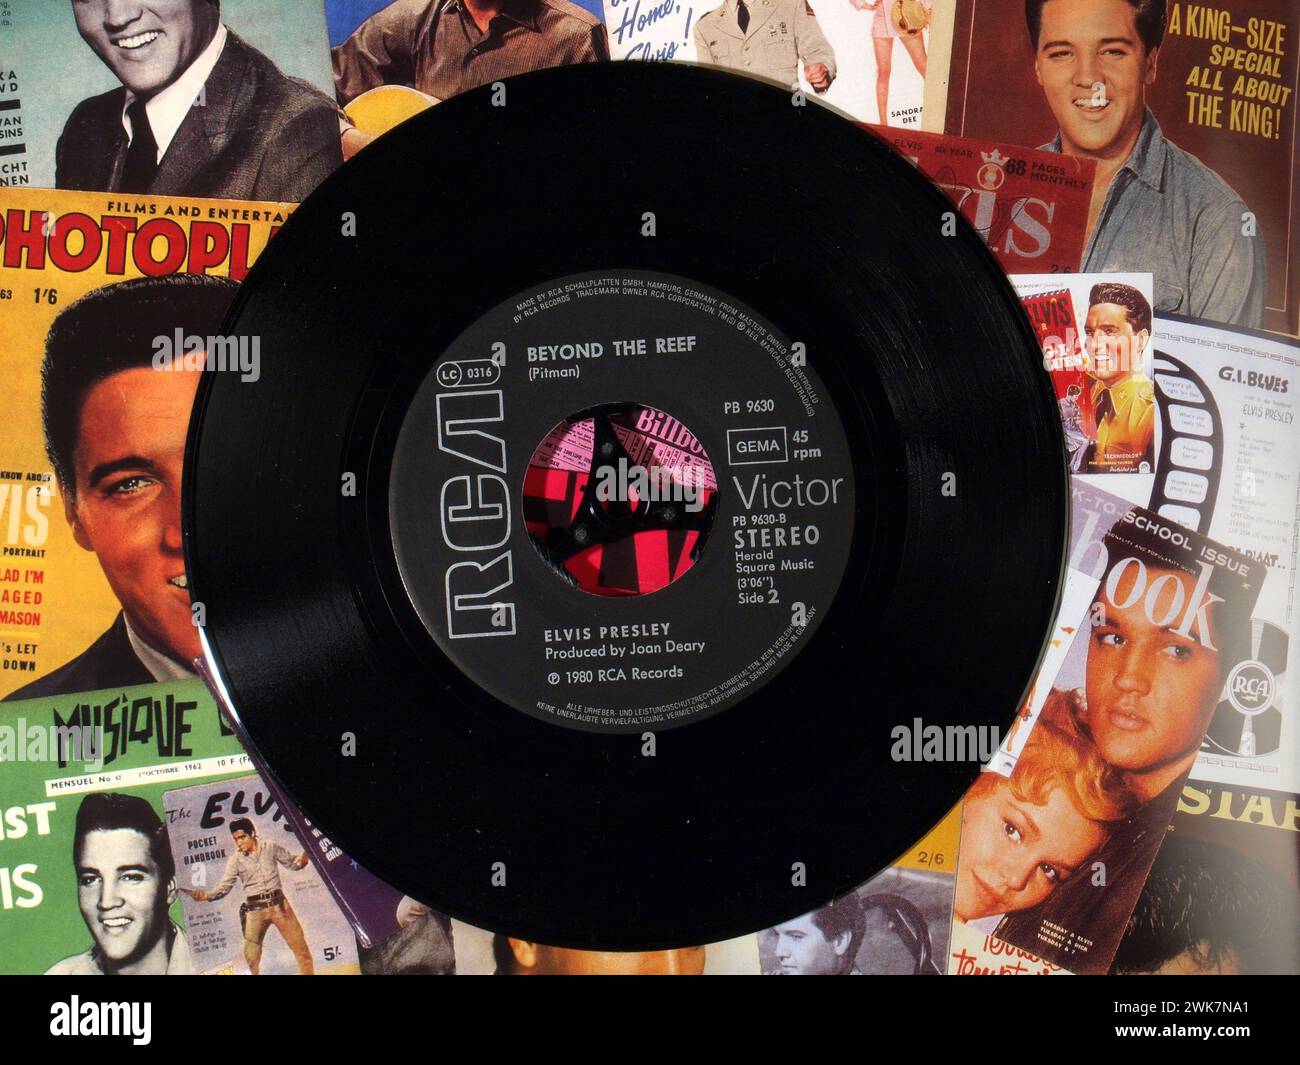 Music Exhibition - Elvis Presley - Single Vinyl Record with Pictures; King of Rock and Roll Stock Photo